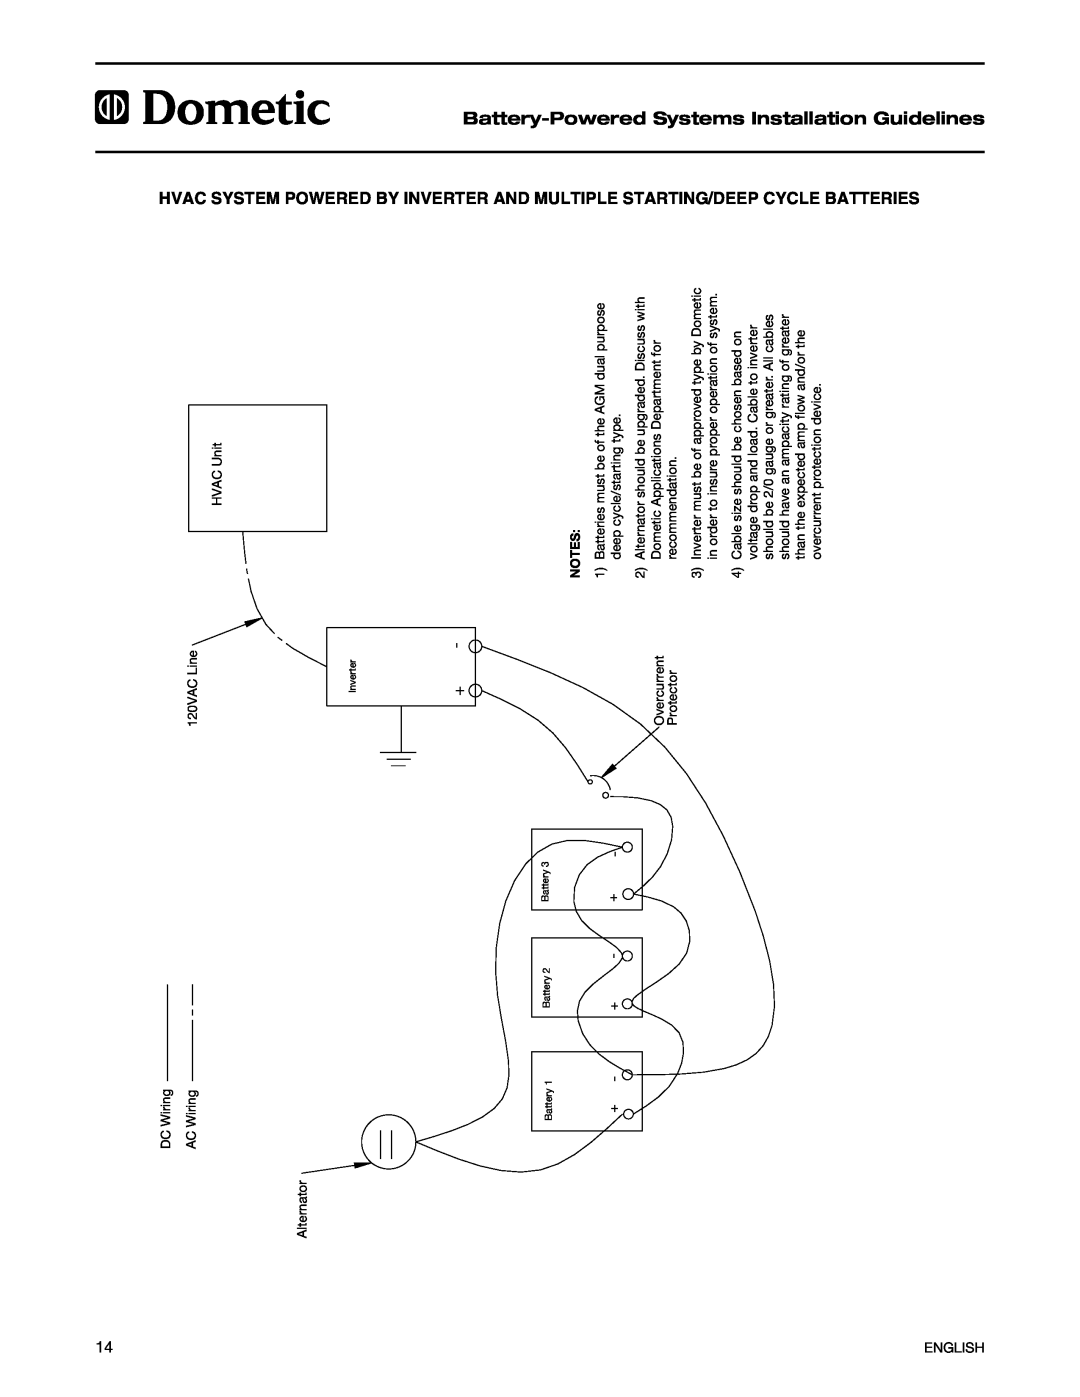 Dometic 2597 manual HVAC System Powered by, Battery-PoweredSystems Installation, Guidelines, English 